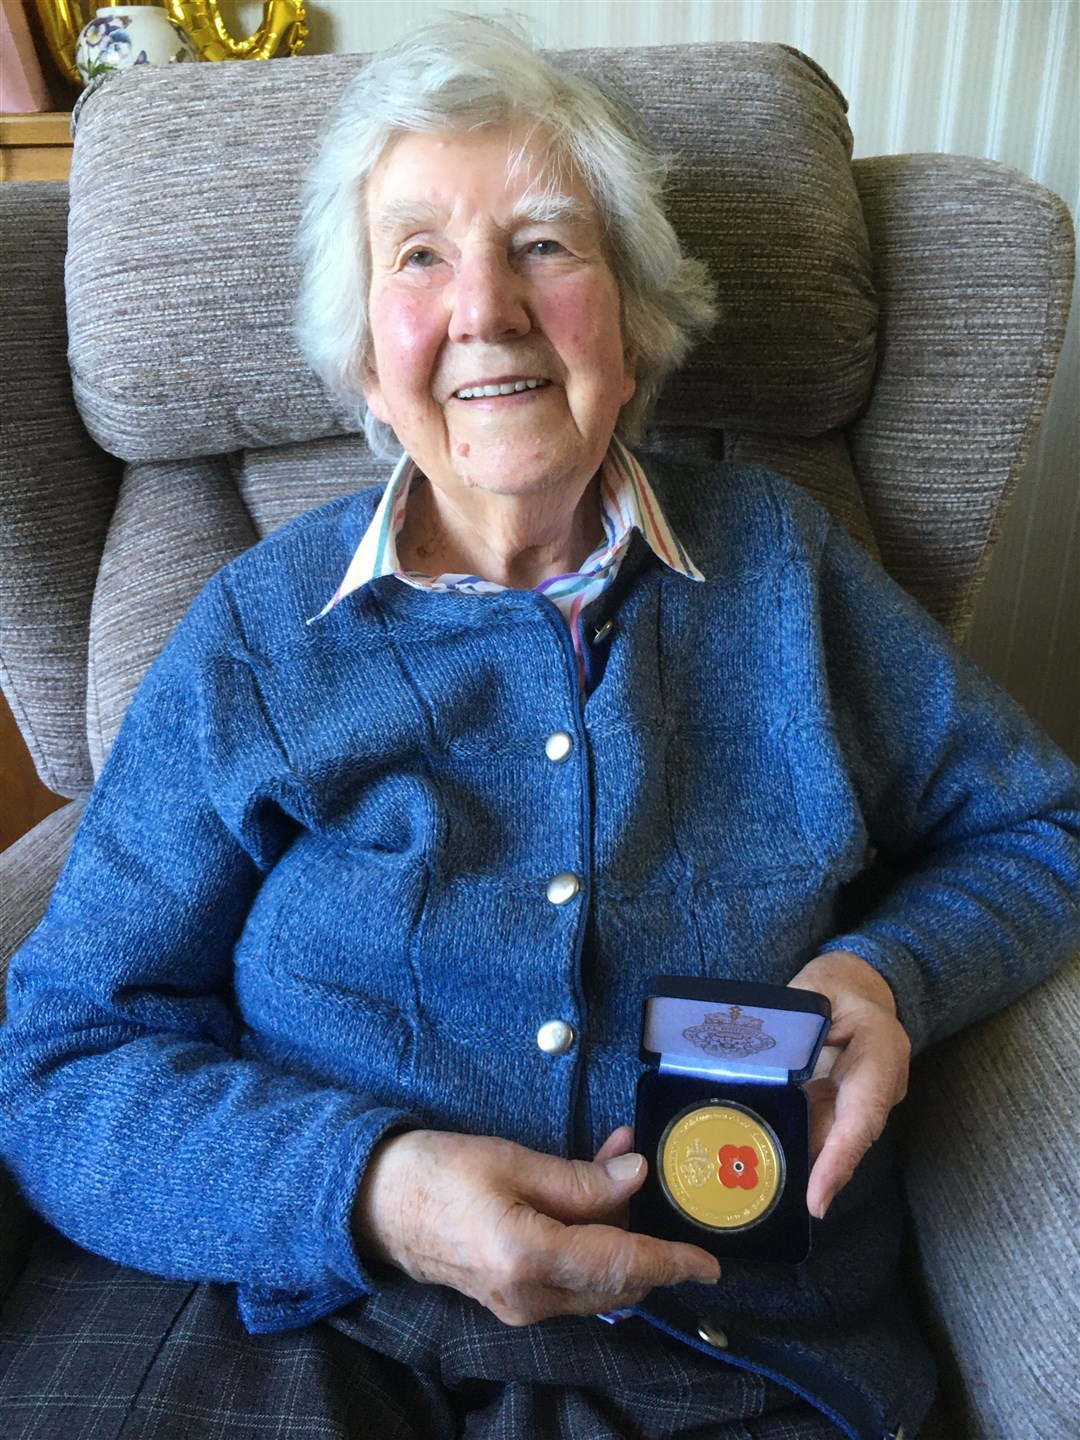 Barbara Rae Mum was also given last week a V75 medallion from the British Legion. She was thrilled with that because she never claimed her service medal just being glad Europe was at peace and she was able to go back home. She said the ‘Forgetting’ of the troops still in Far East was largely due to sheer relief at home.